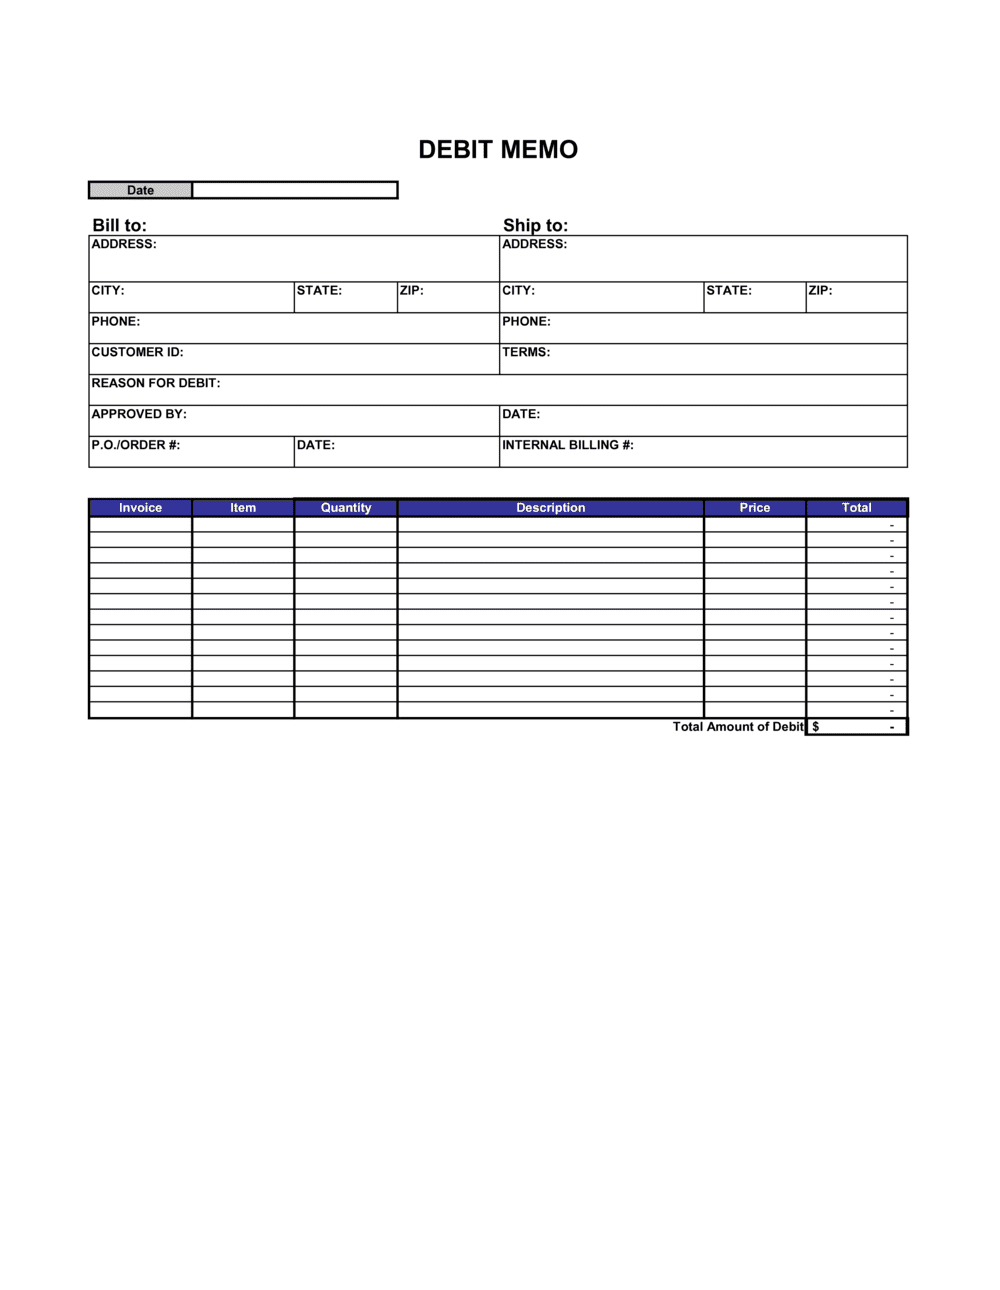 Debit Memo Template  by Business-in-a-Box™ Regarding Credit Note Template On Word Download